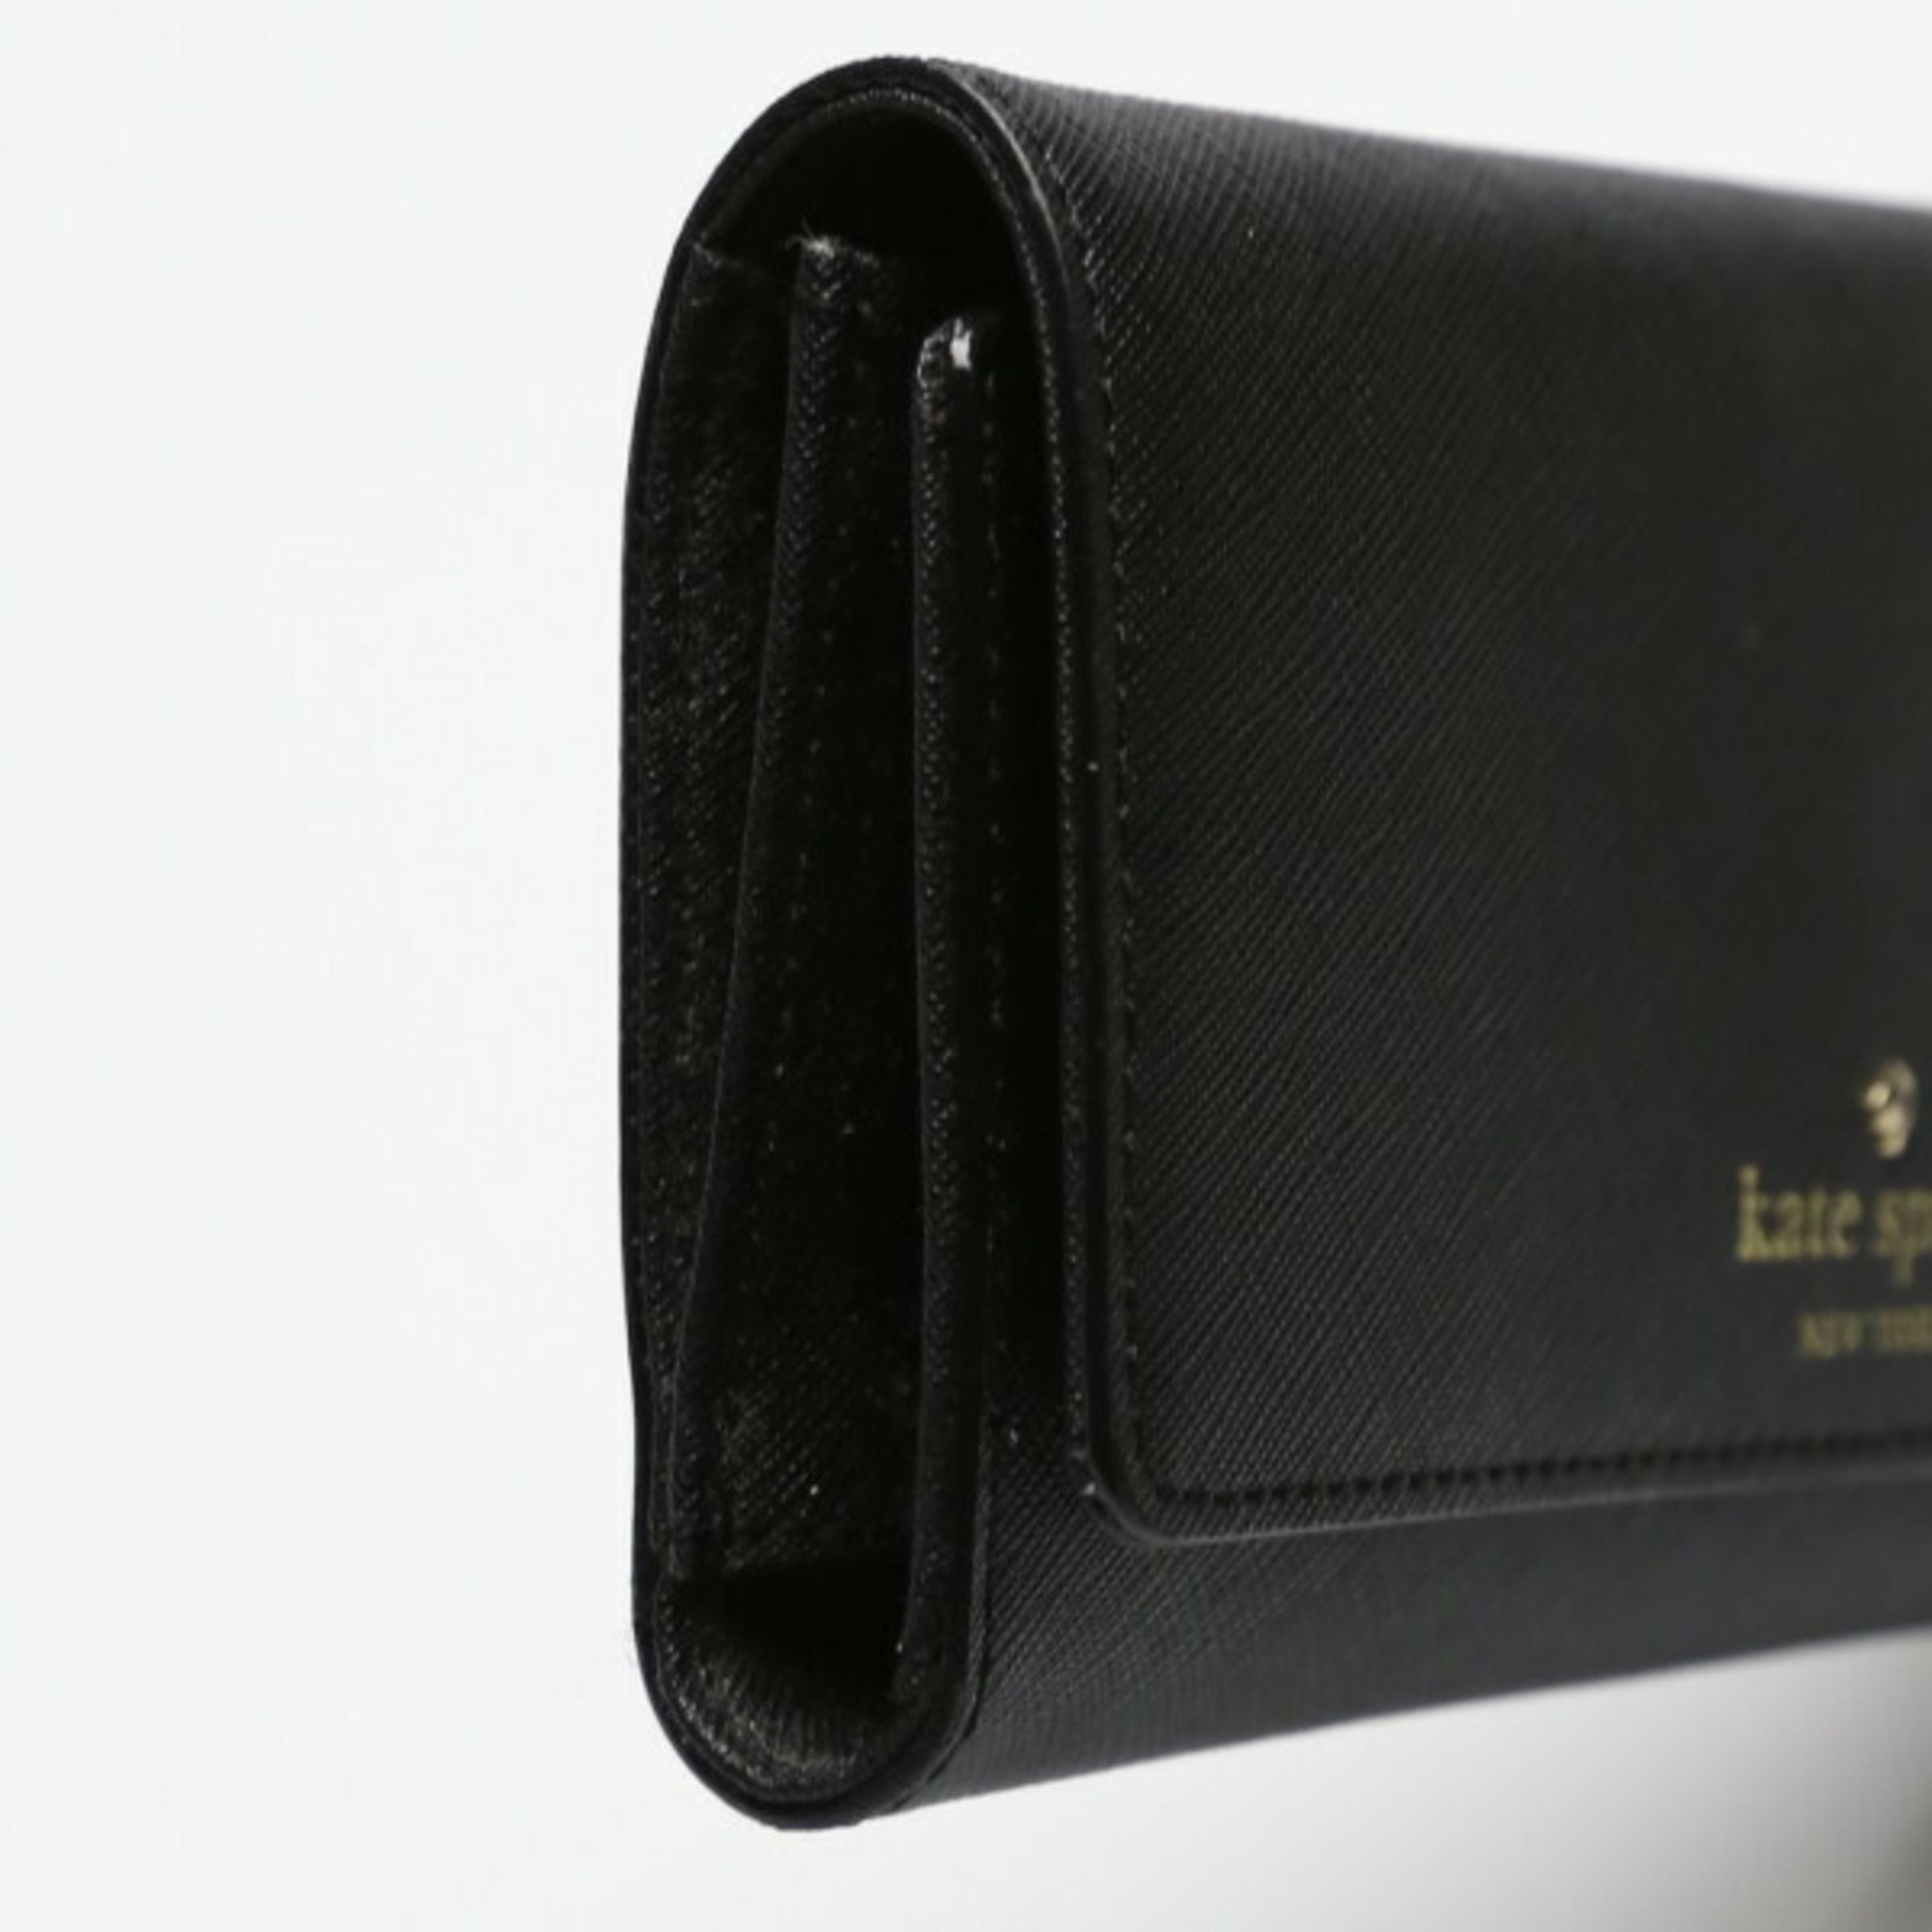 Kate Spade Trifold Long Wallet Leather Black